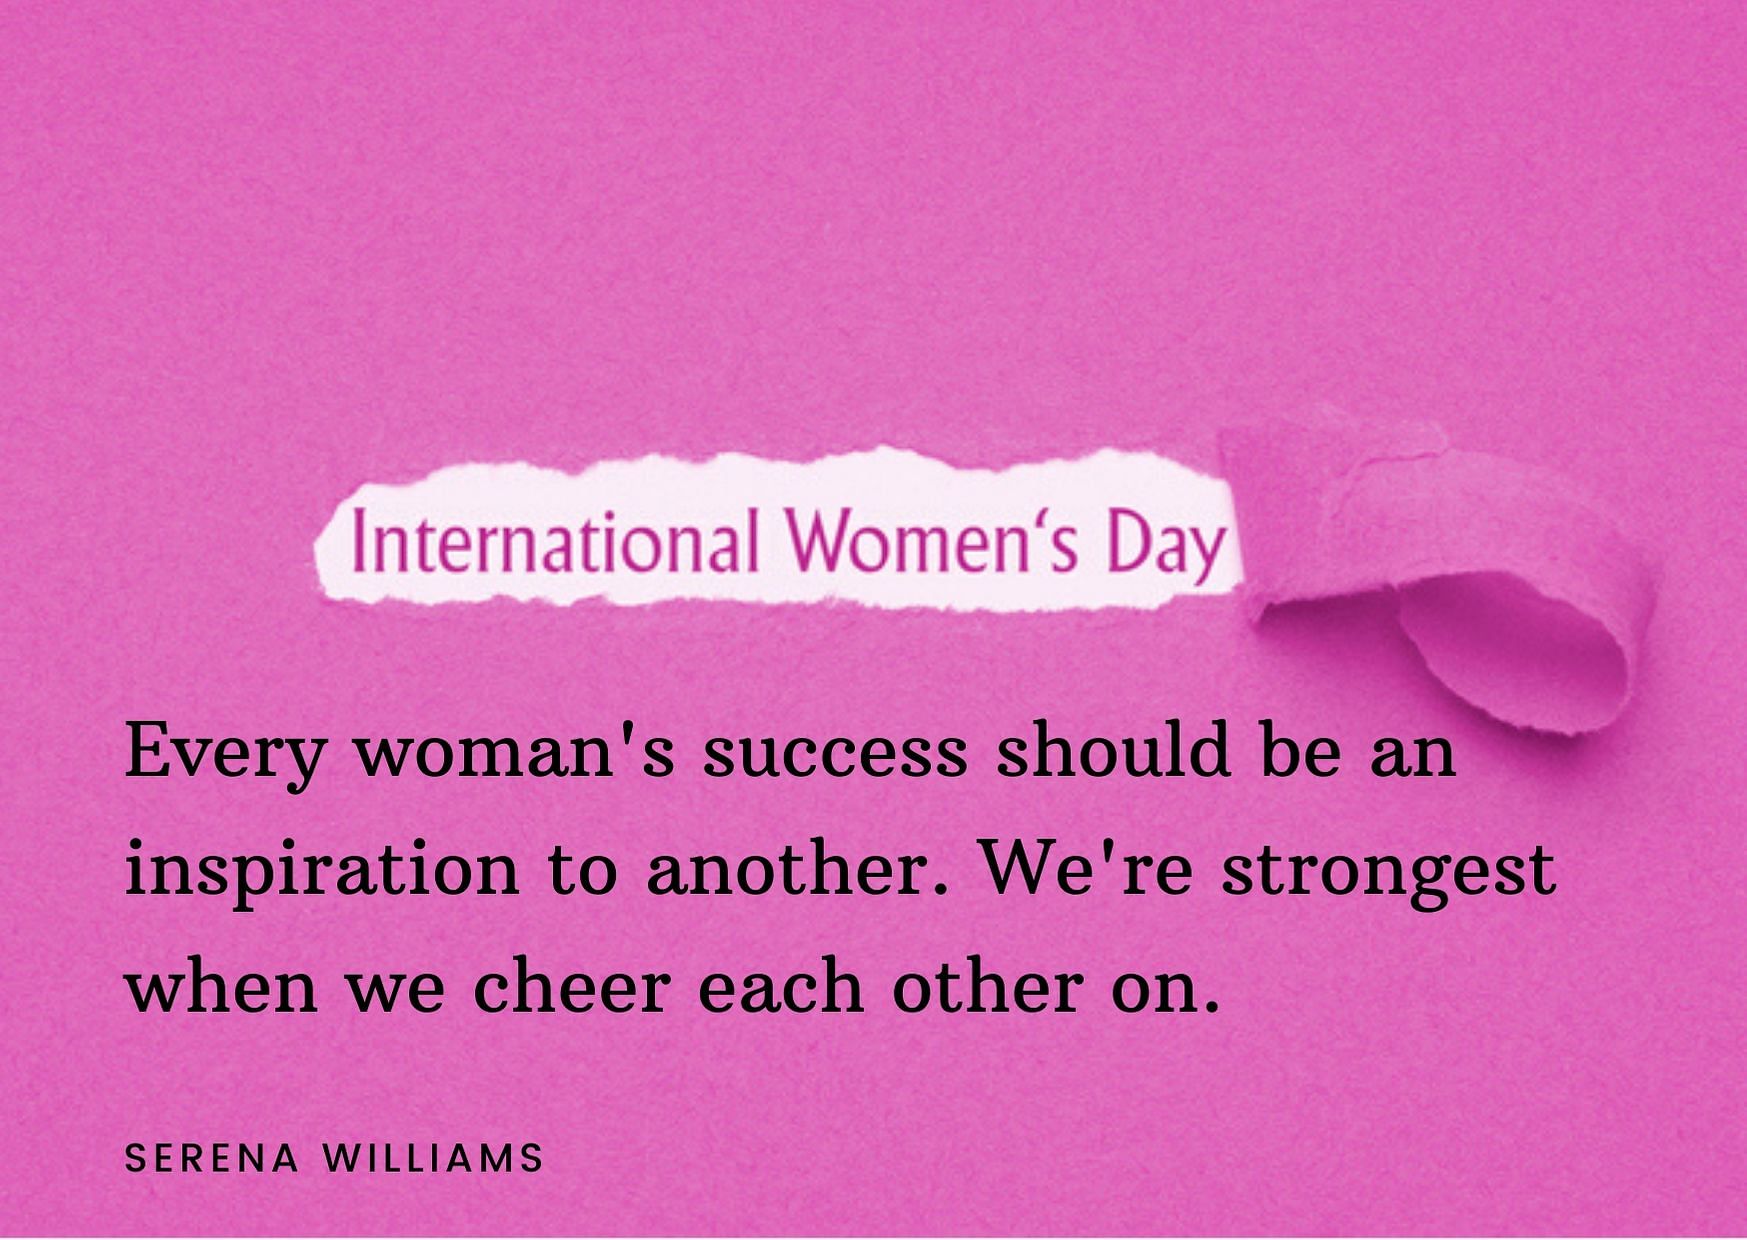 Happy Womens Day Mahila Diwas 2021 Images With Quotes Status International Mahila Diwas Wishes History Theme Why We Celebrate Women S Day On 8 March